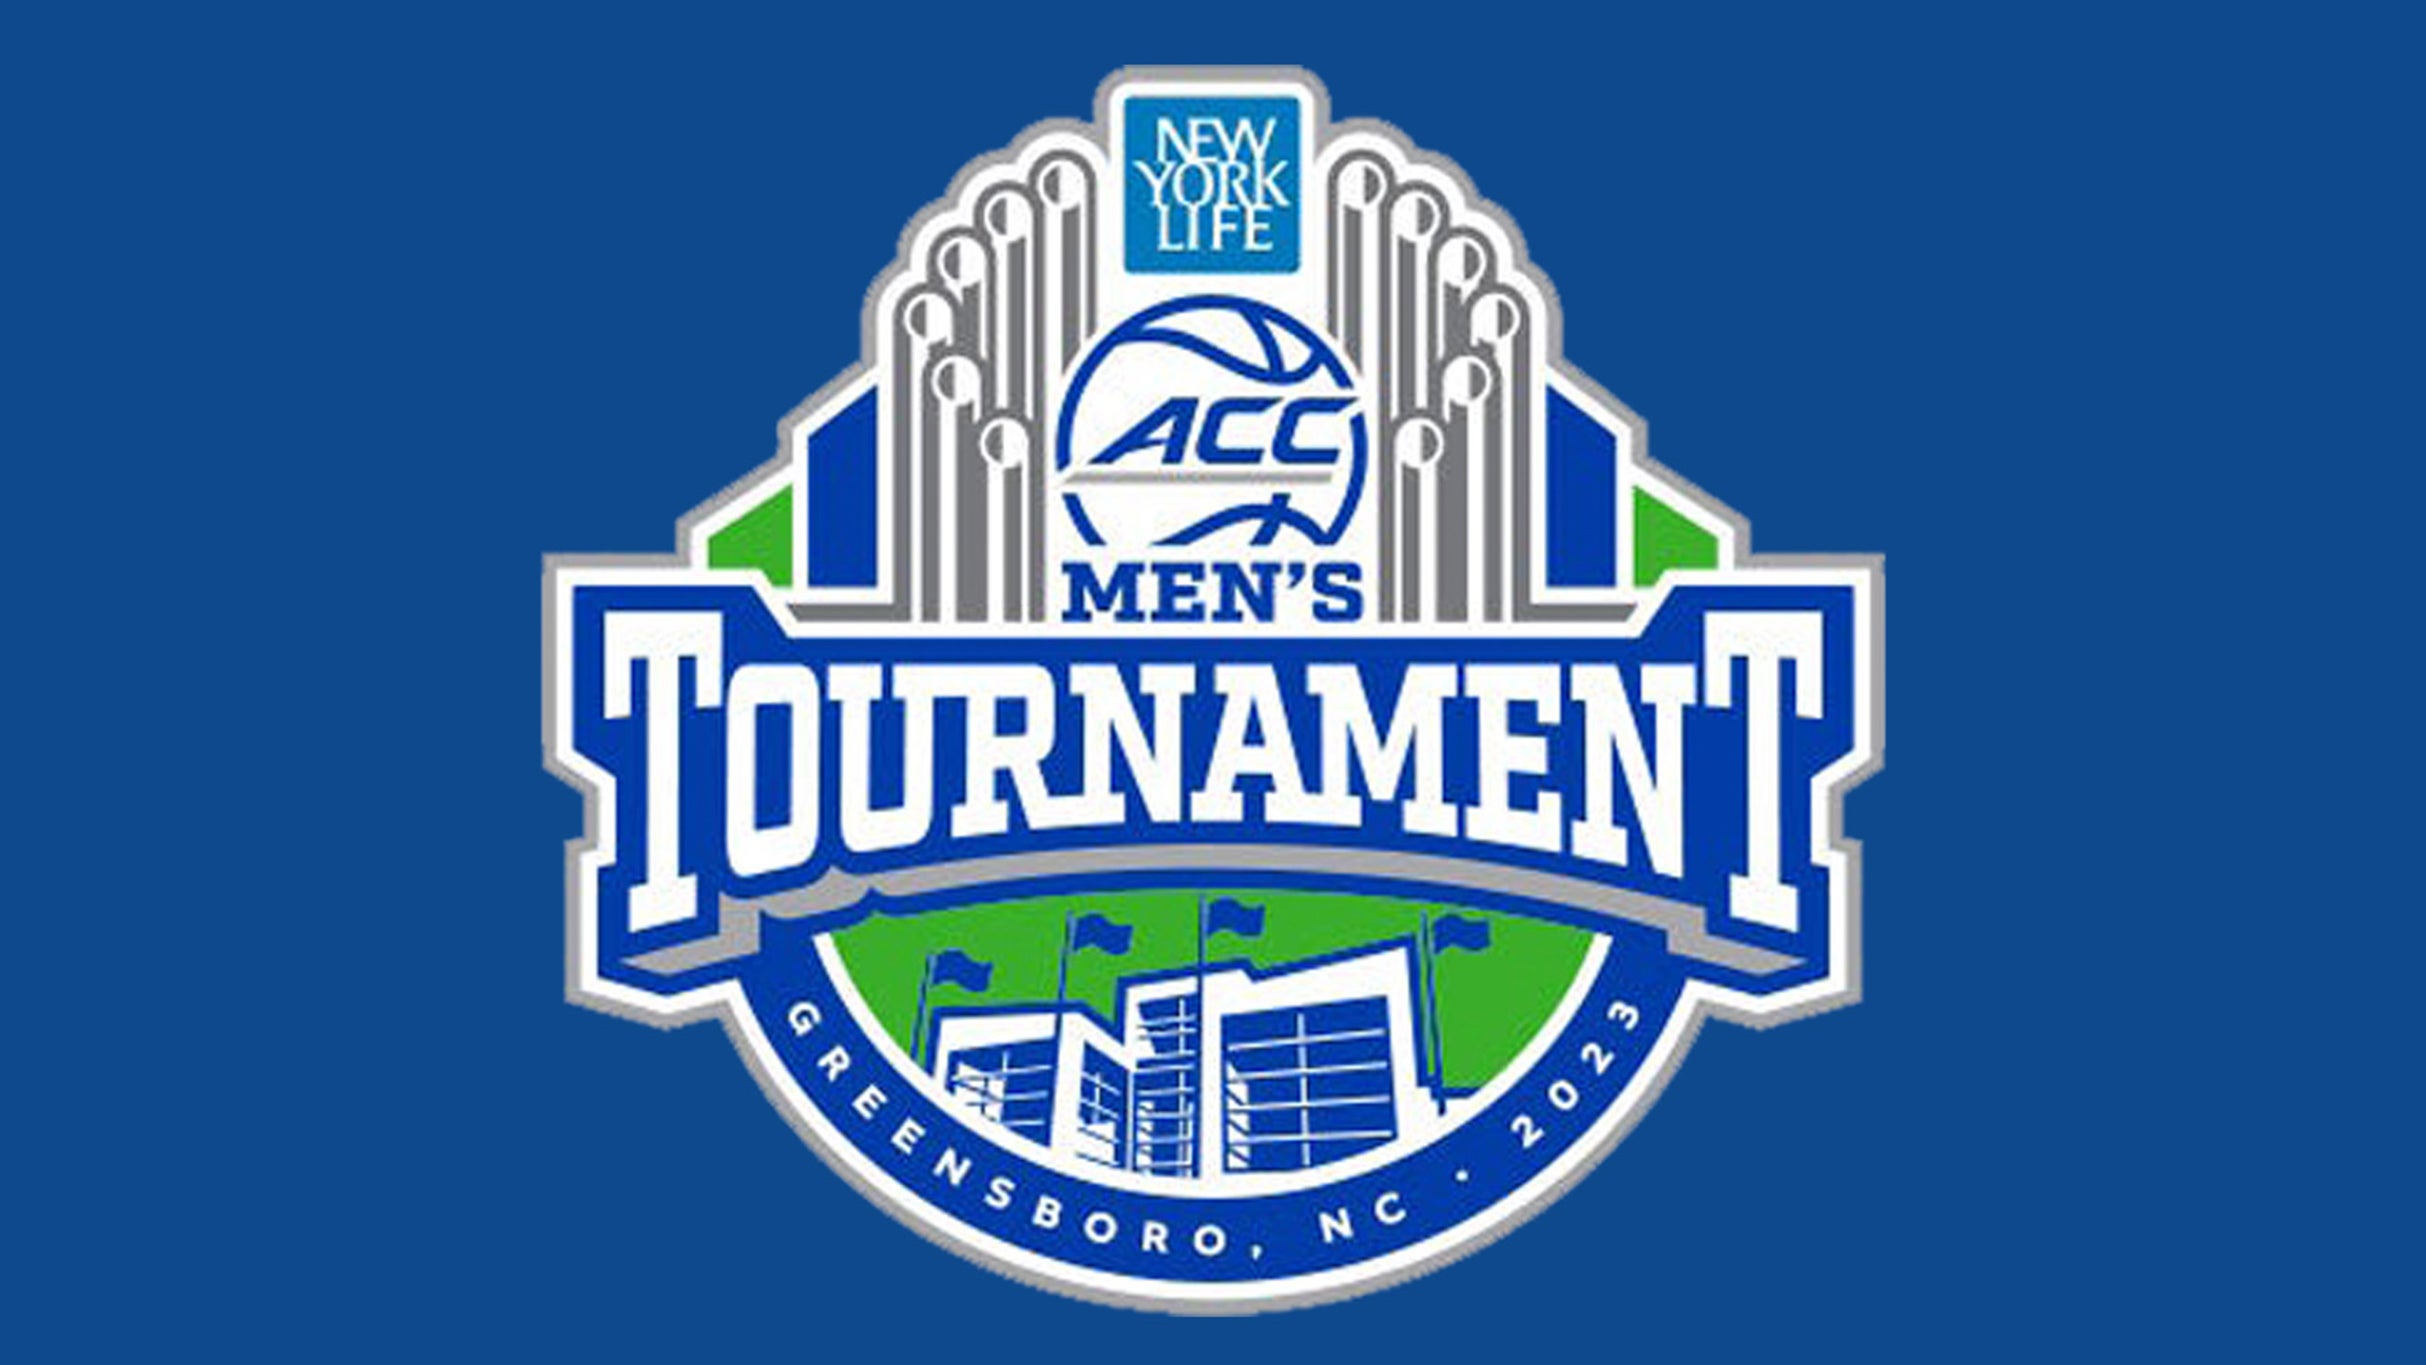 2023 New York Life ACC Men's Basketball Tournament Session 1 in Greensboro promo photo for Resale Onsale presale offer code